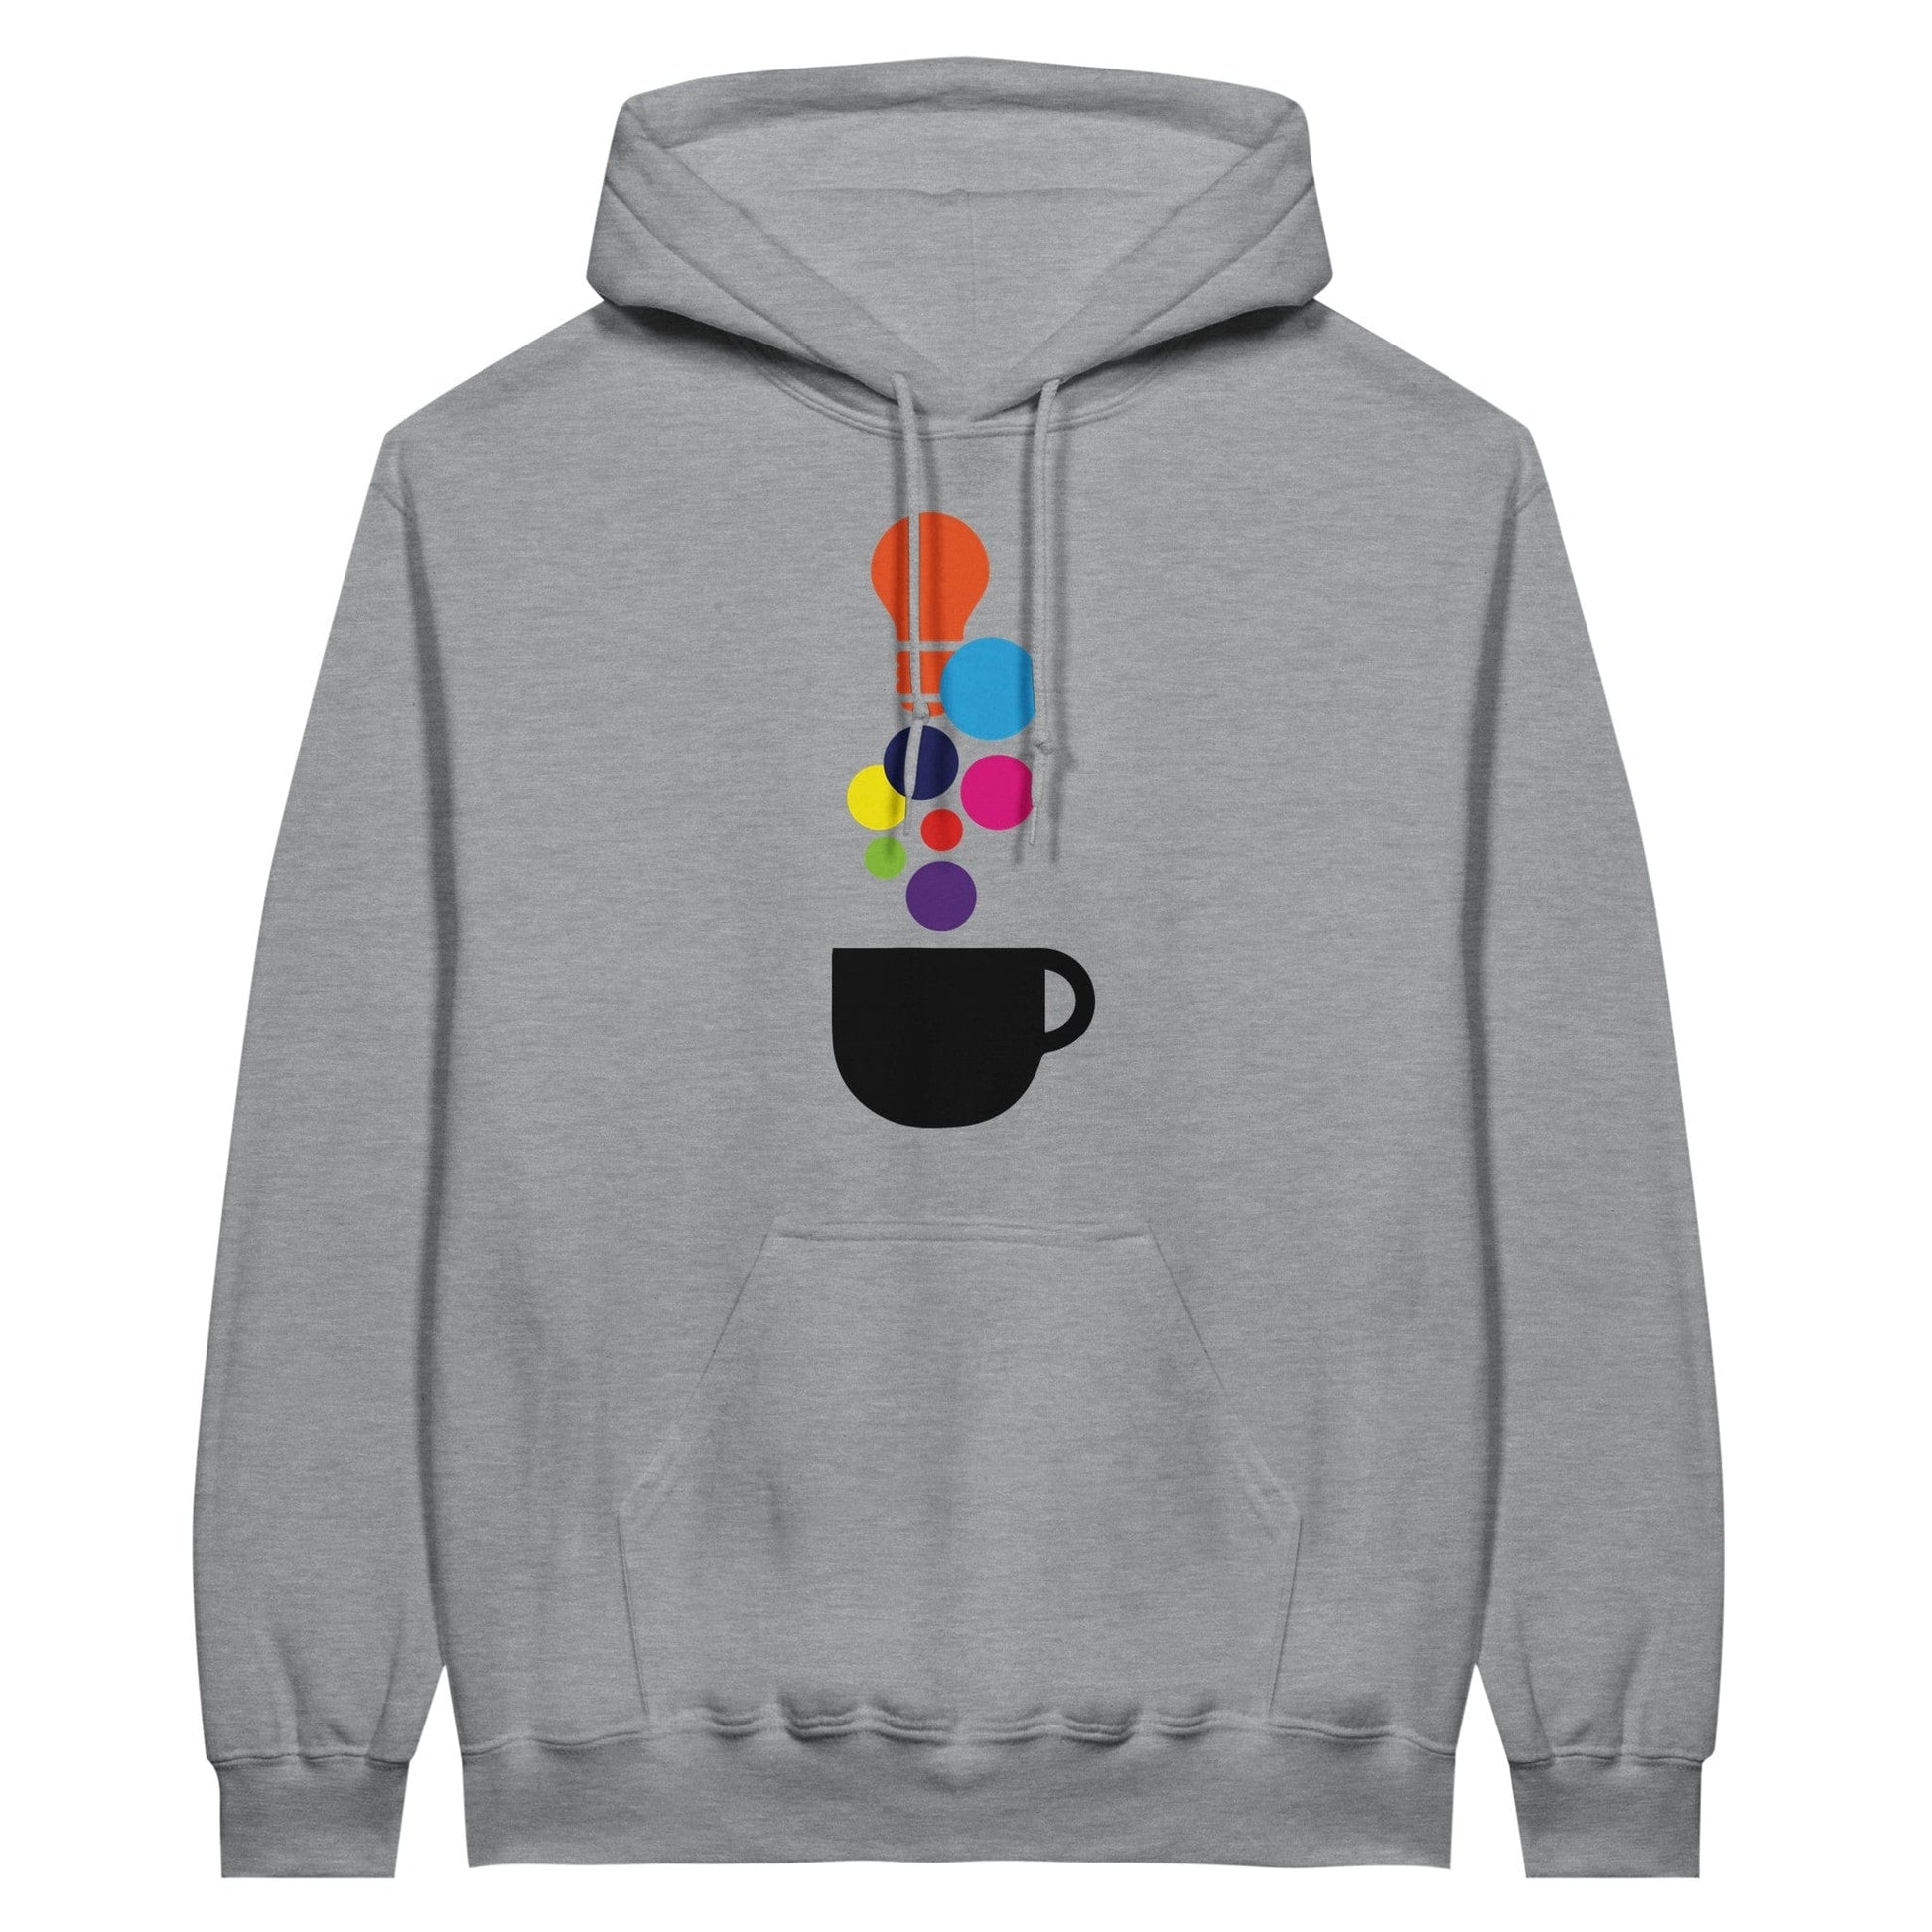 Good Bean Gifts "Creativity in a Cup" - Classic Unisex Pullover Hoodie S / Sports Grey